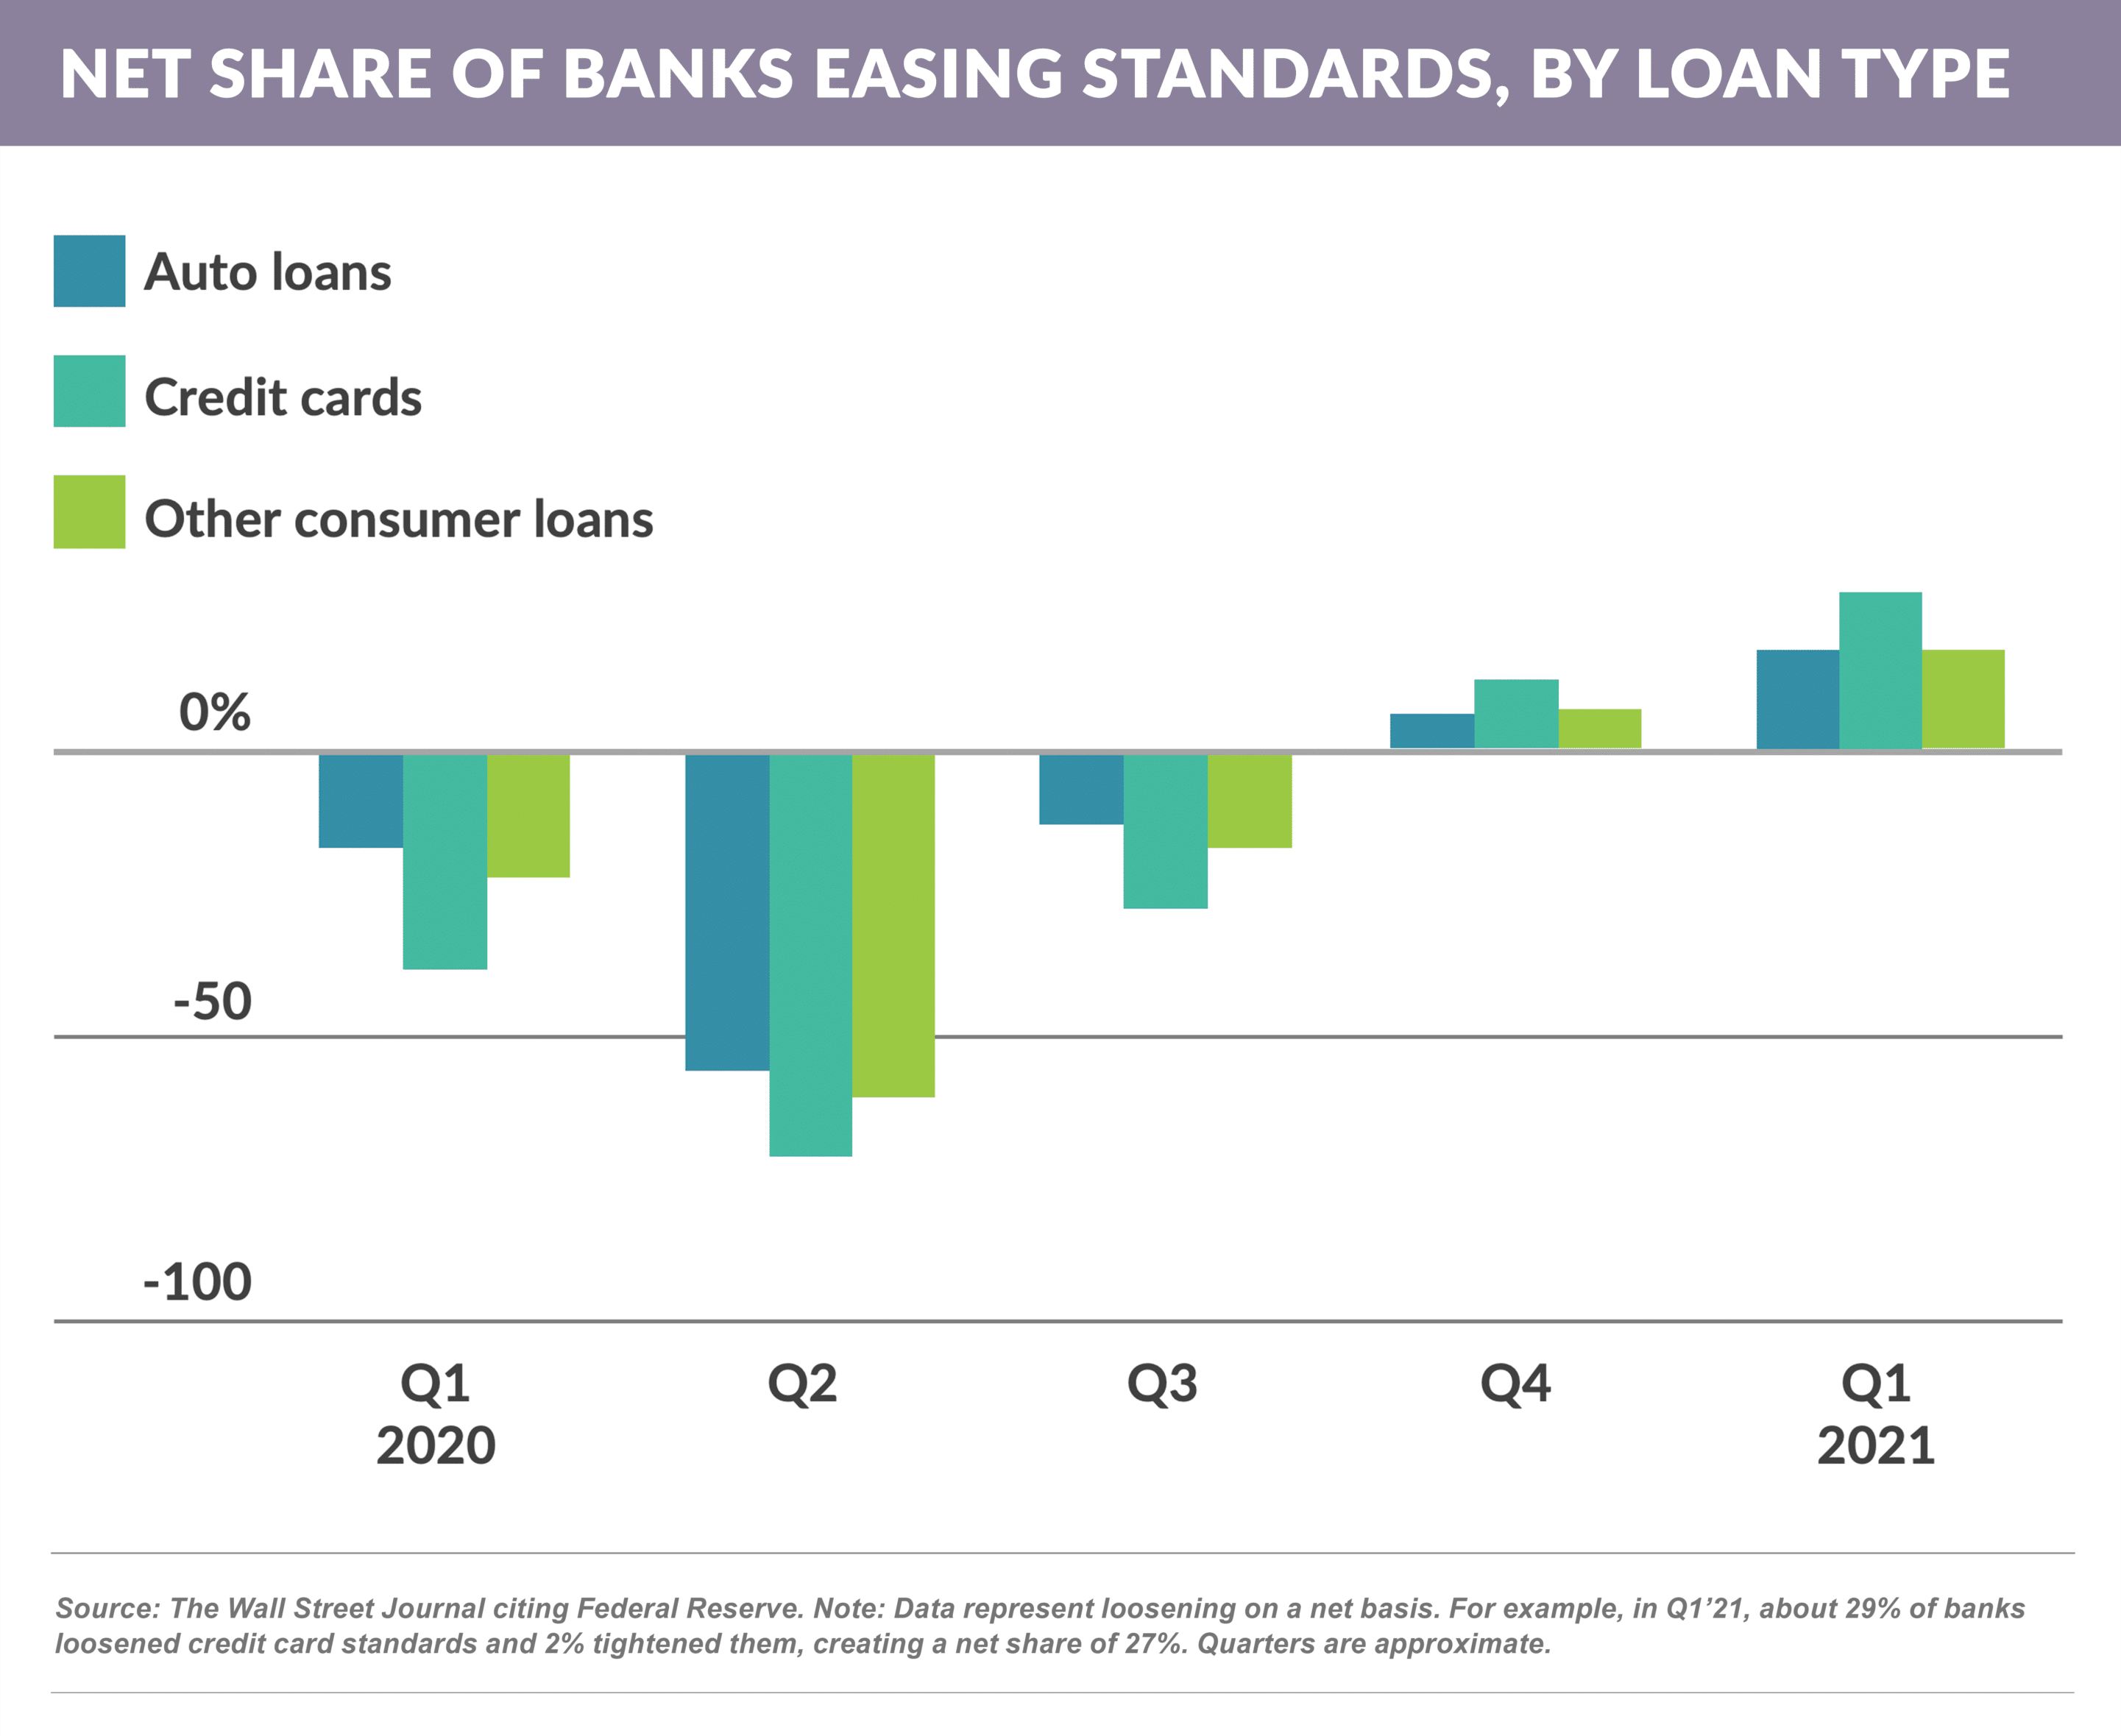 Net share of banks easing standards, by loan type